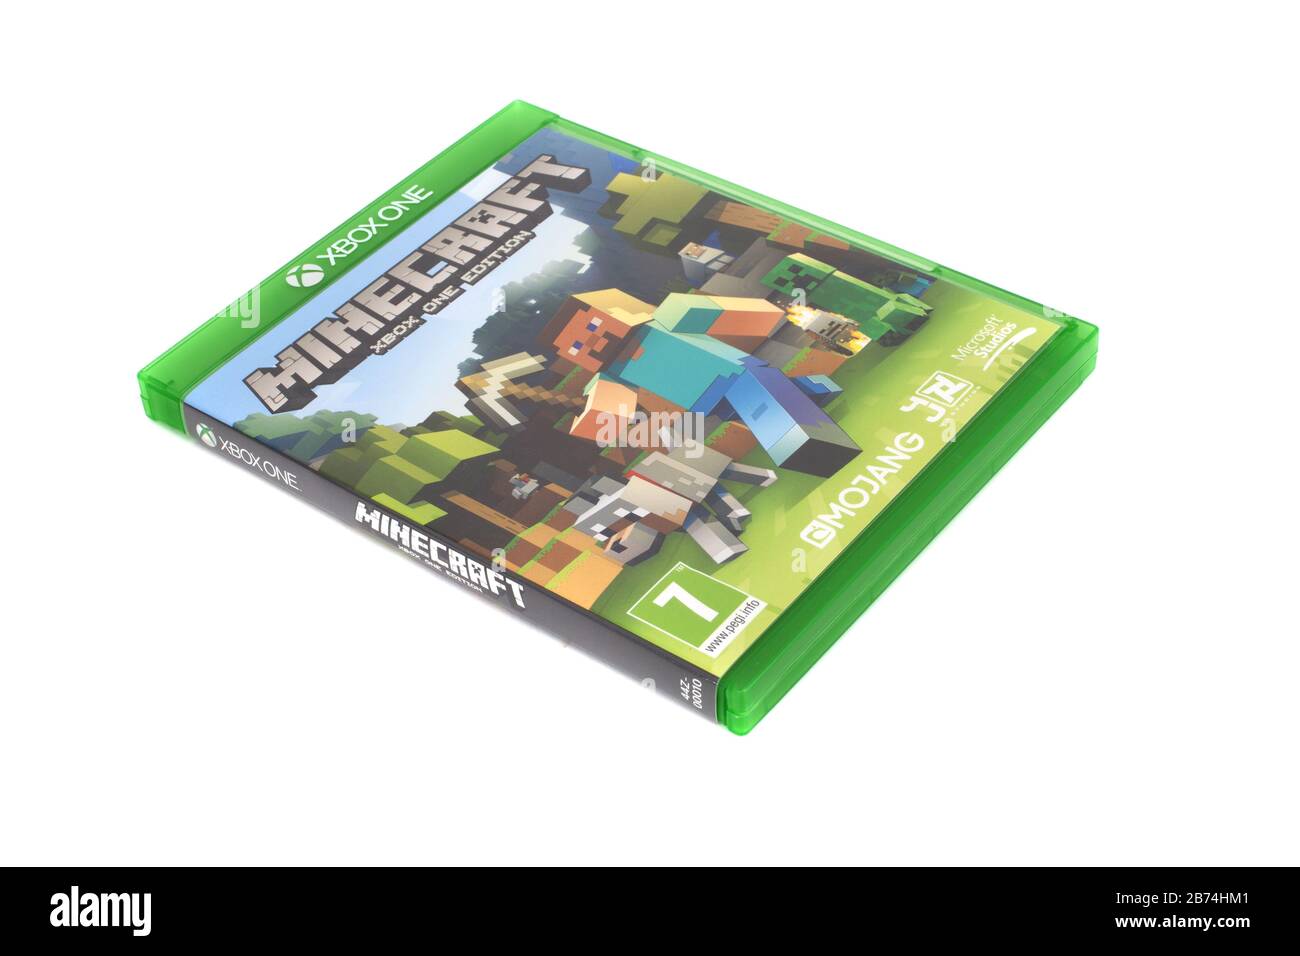 The Xbox Game Minecraft By Mojang Stock Photo Alamy